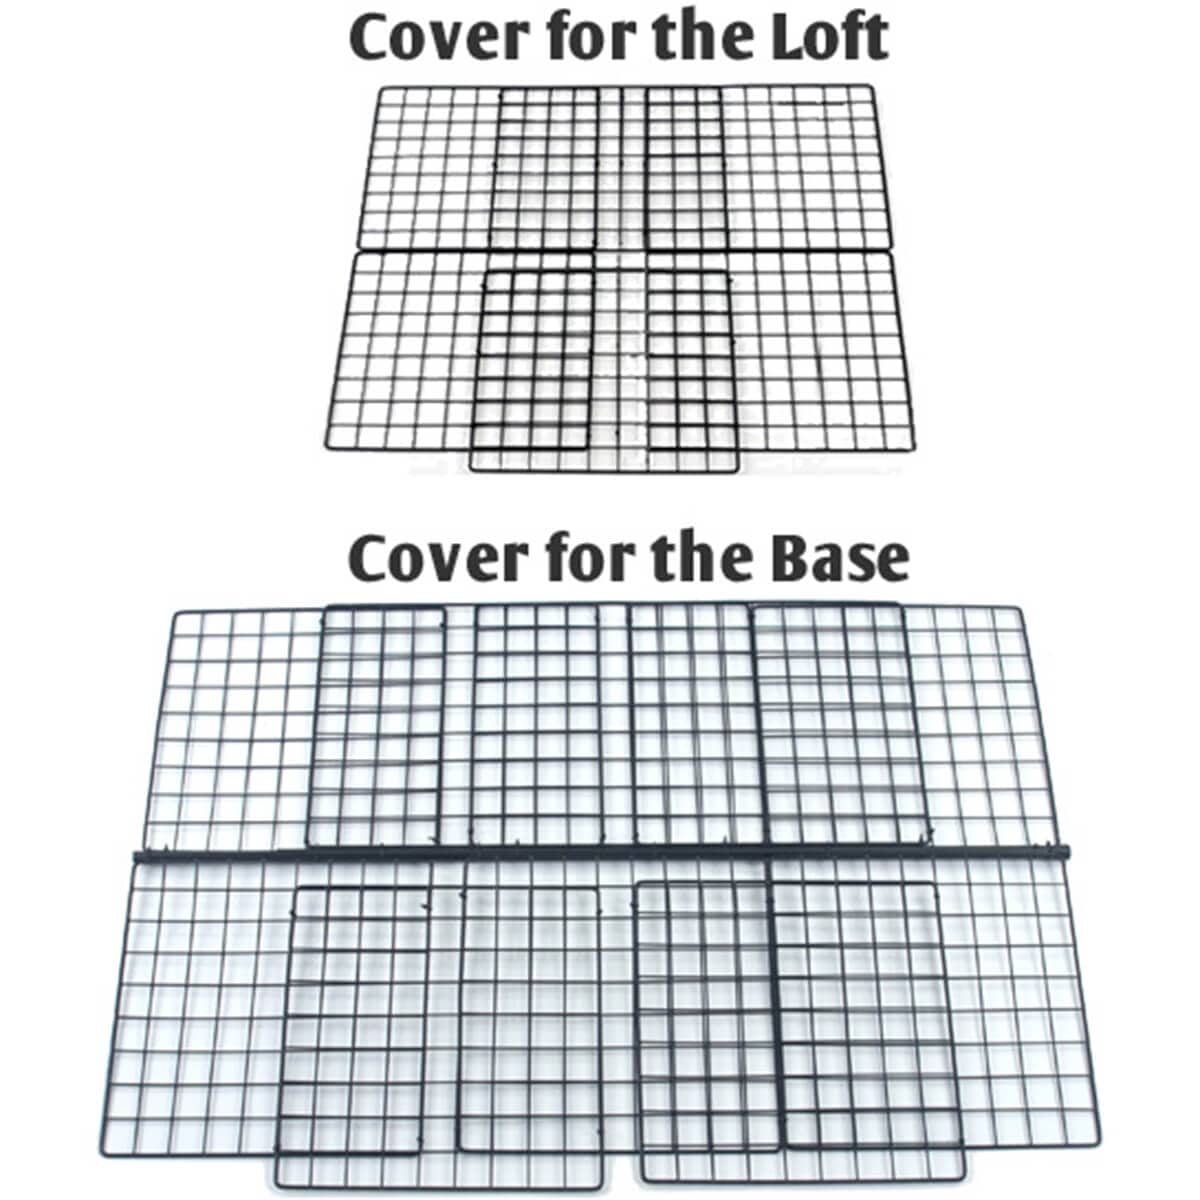 How to lay your grids out for a XL/wide covered C&C guinea pig cage